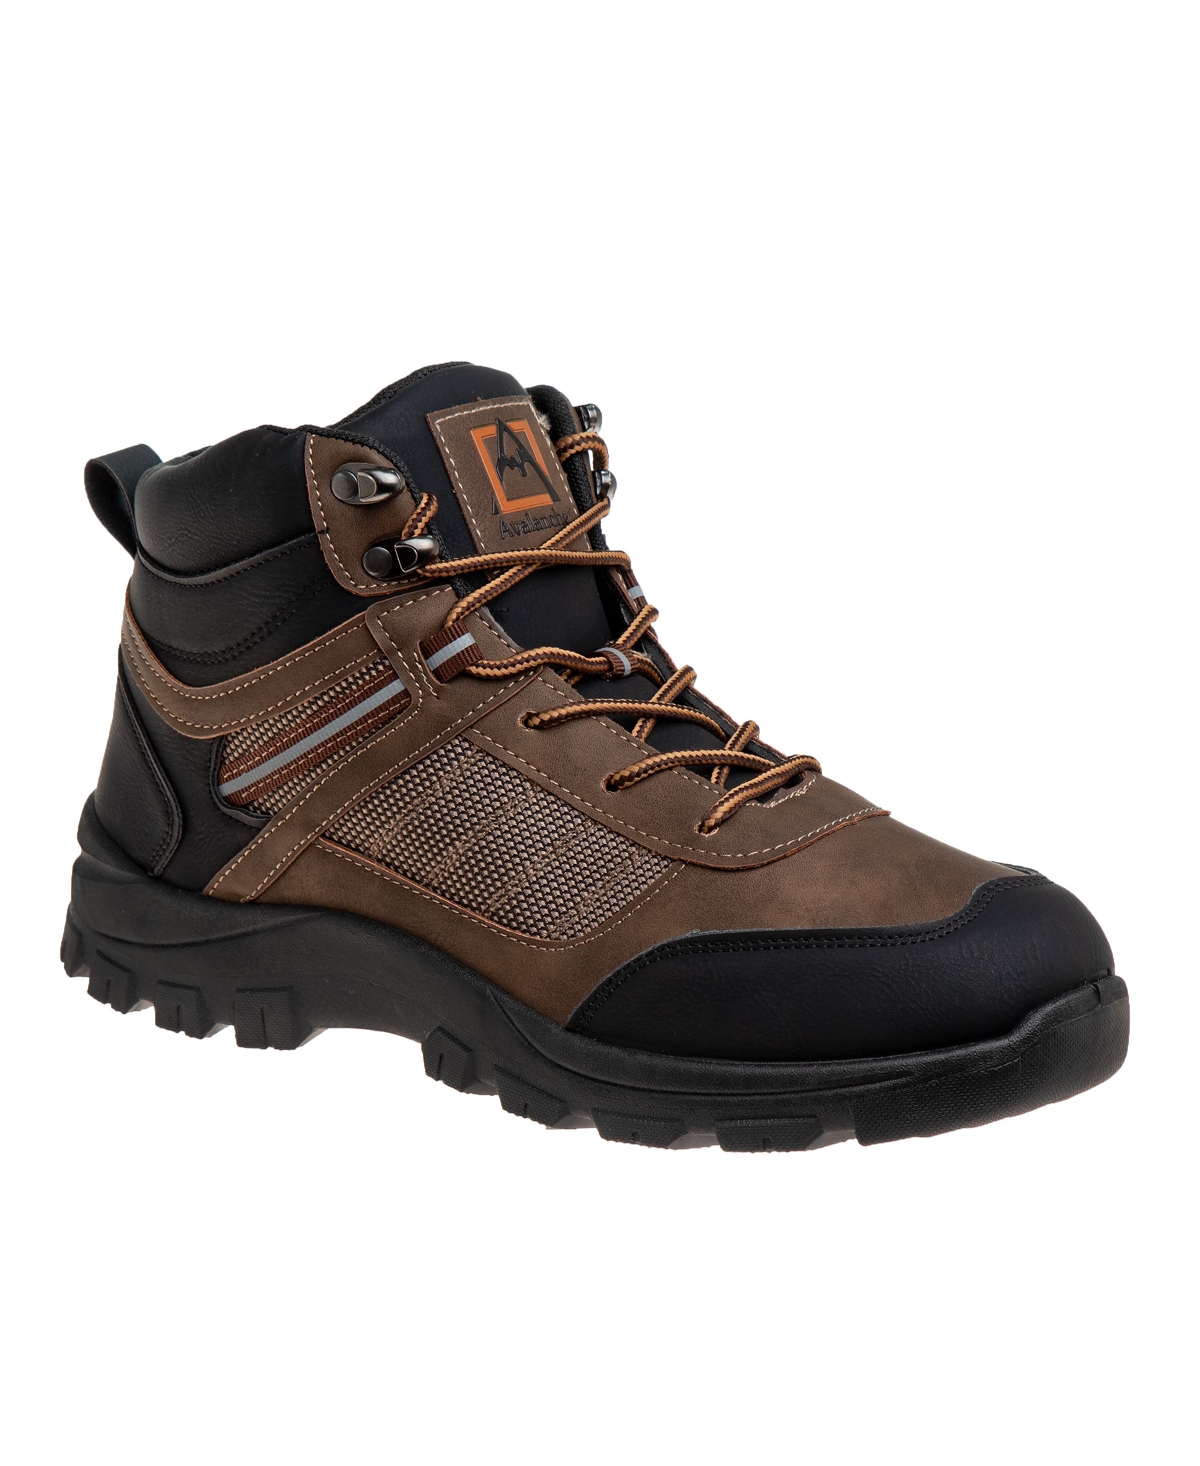 Avalanche Men's Hiking Boots